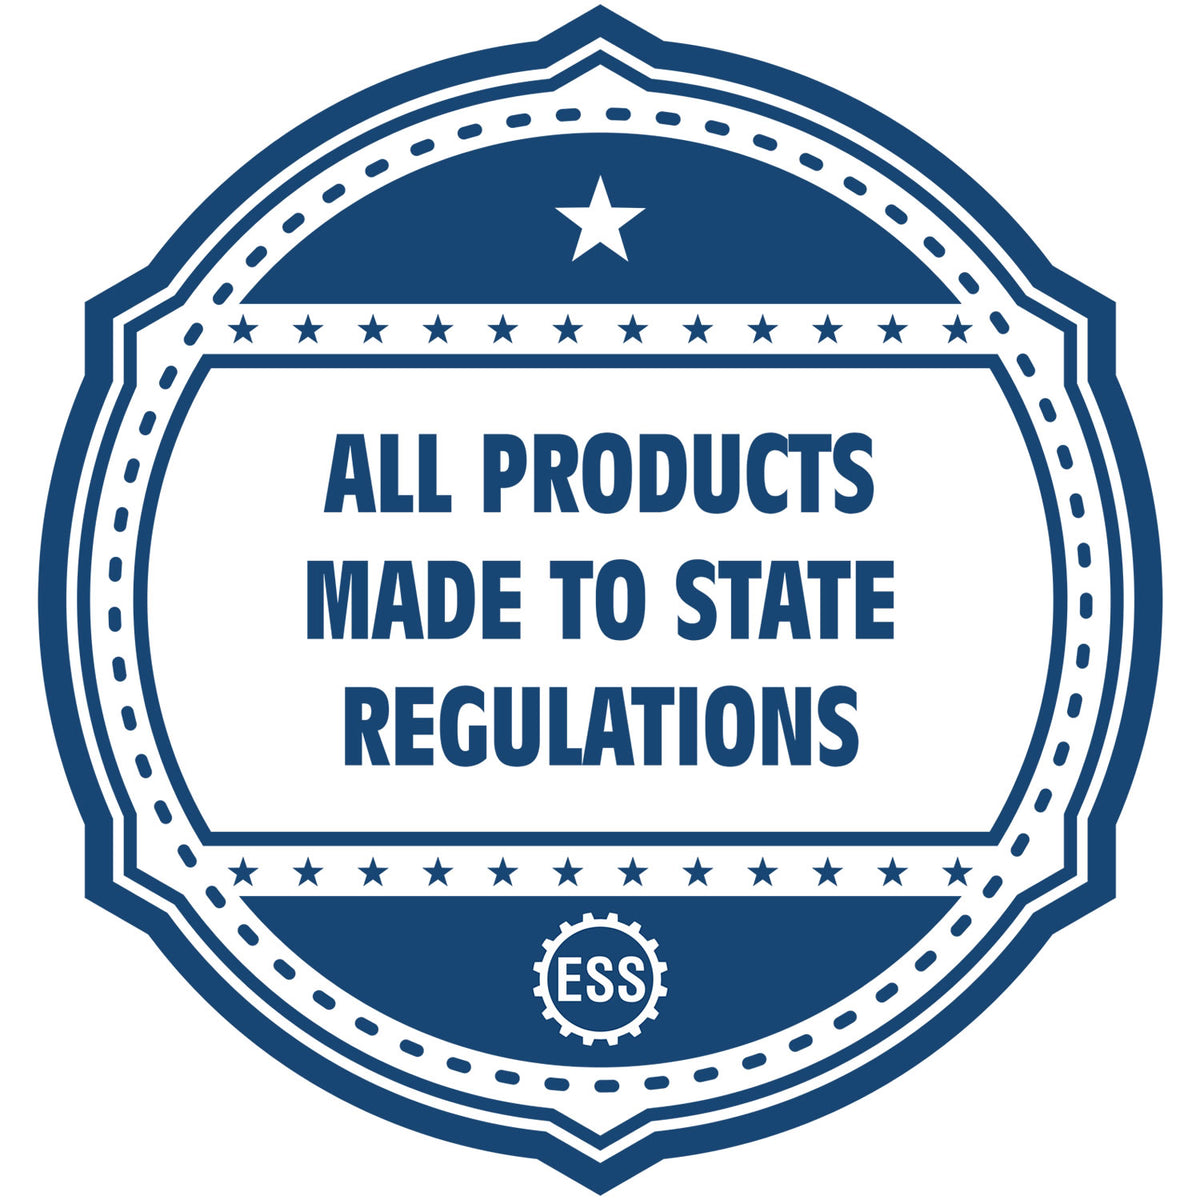 An icon or badge element for the Self-Inking State Seal Maine Notary Stamp showing that this product is made in compliance with state regulations.